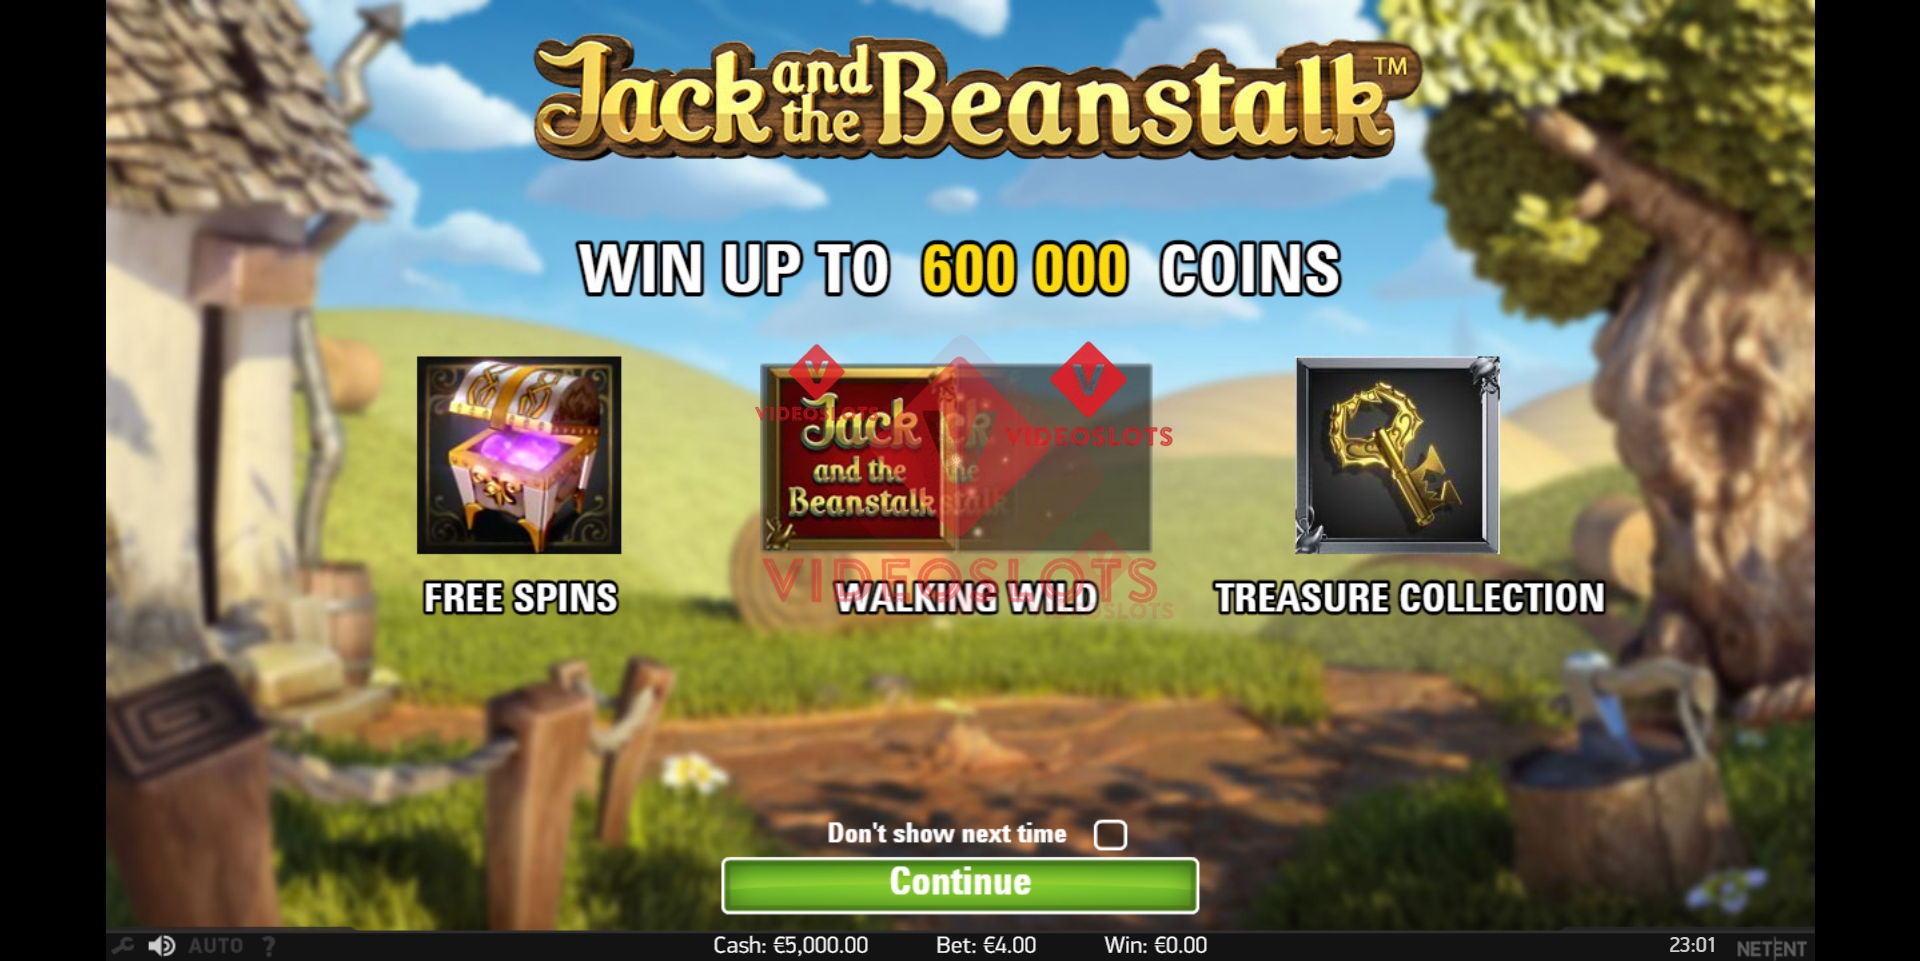 Game Intro for Jack and the Beanstalk slot from NetEnt